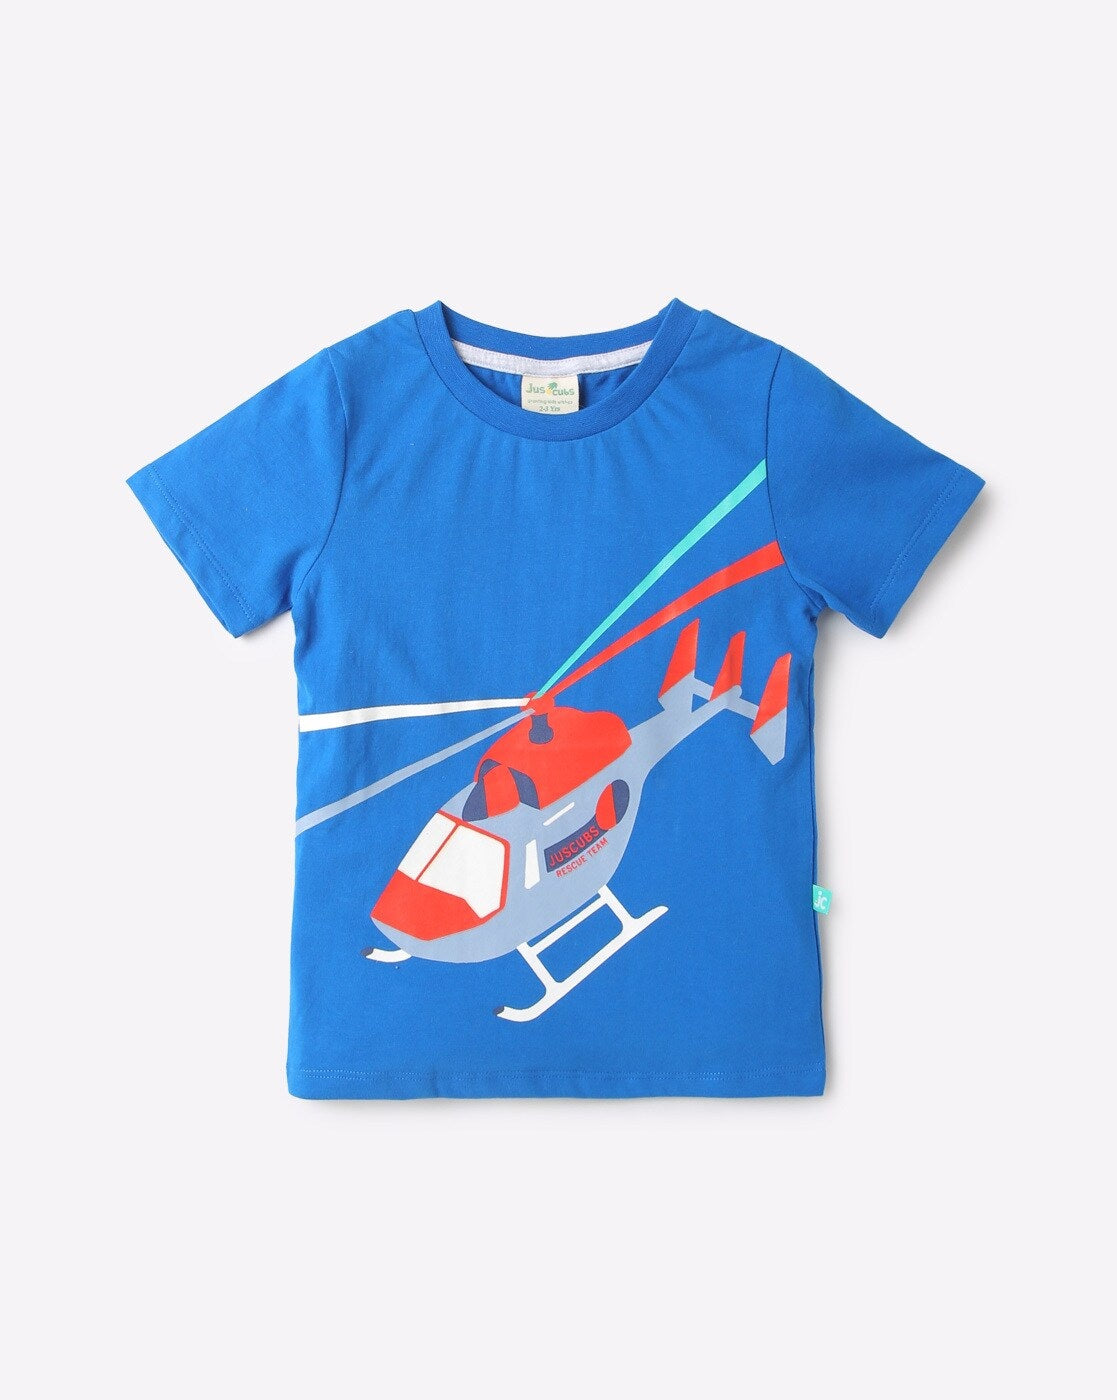 Boys Helicopter Printed T-Shirt - Royal Blue